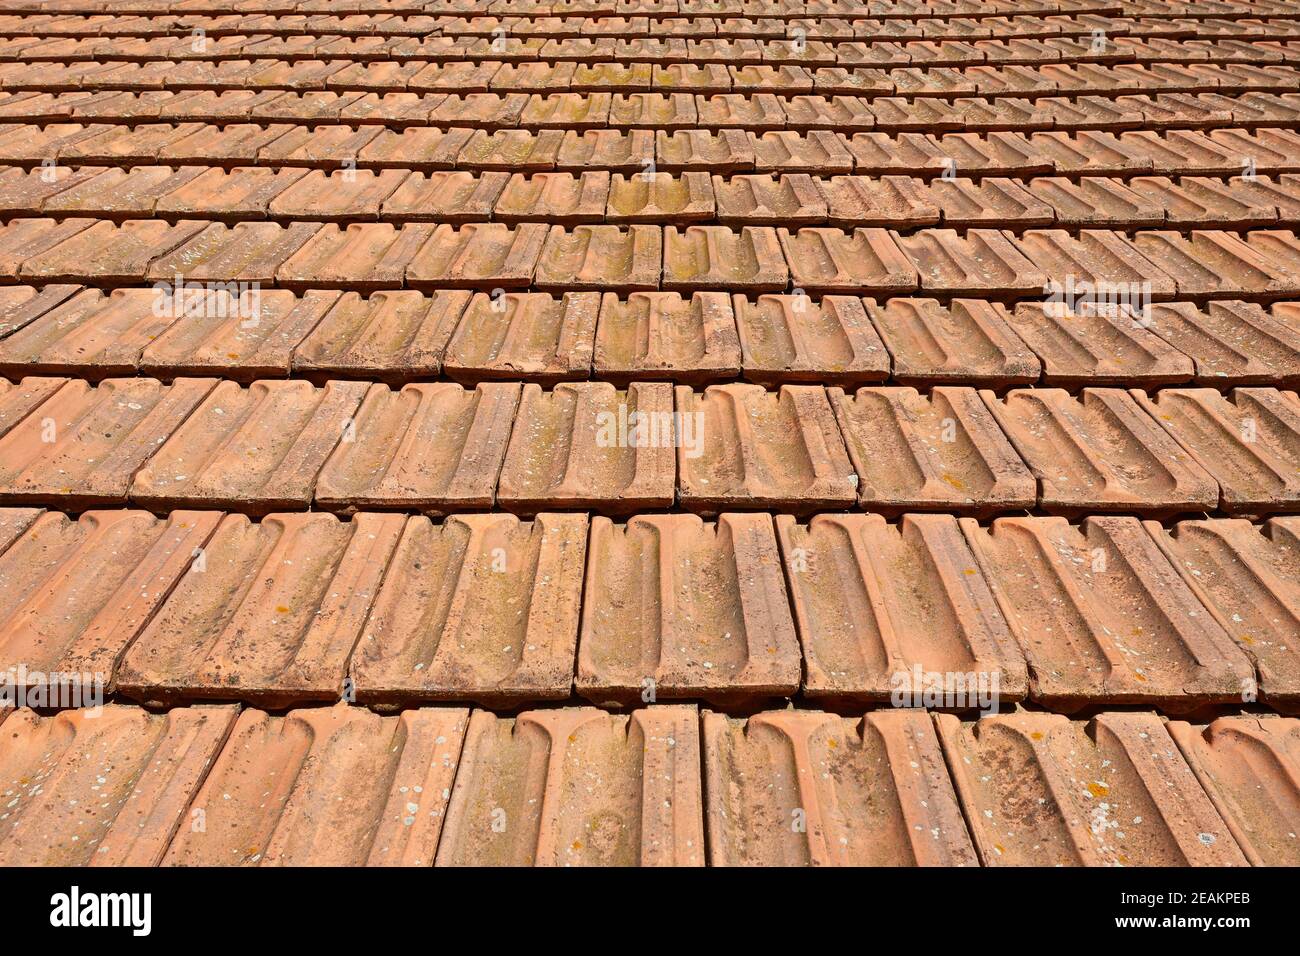 Old roof tiles texture Stock Photo